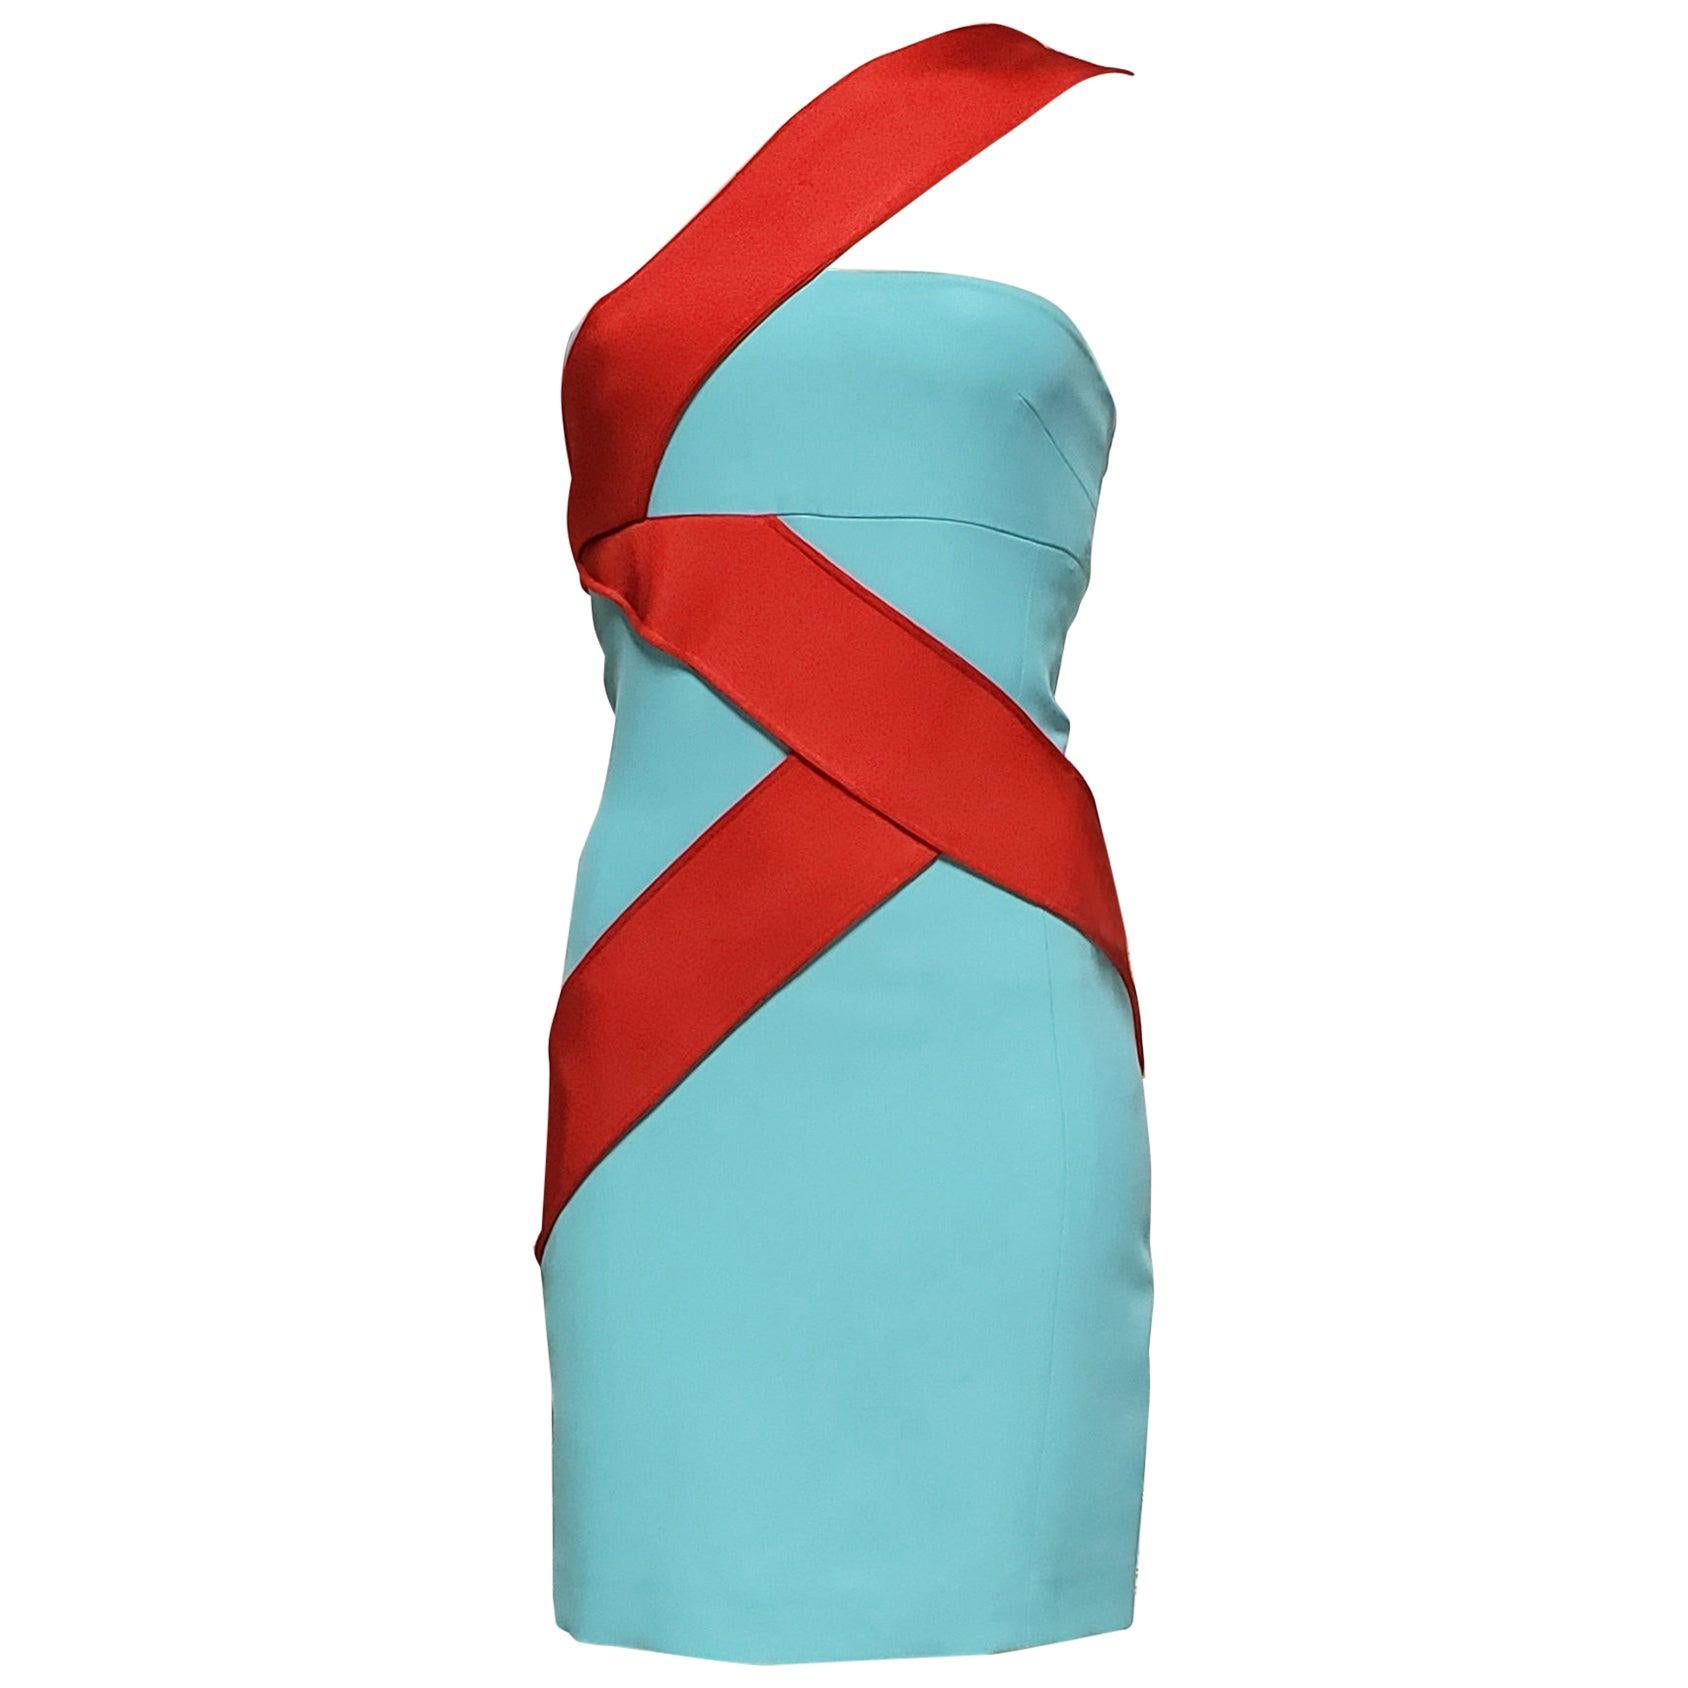 S/S 2015 look # 34 NEW VERSACE BLUE and RED SILK-CADY MINI DRESS 38 - 2  For Sale